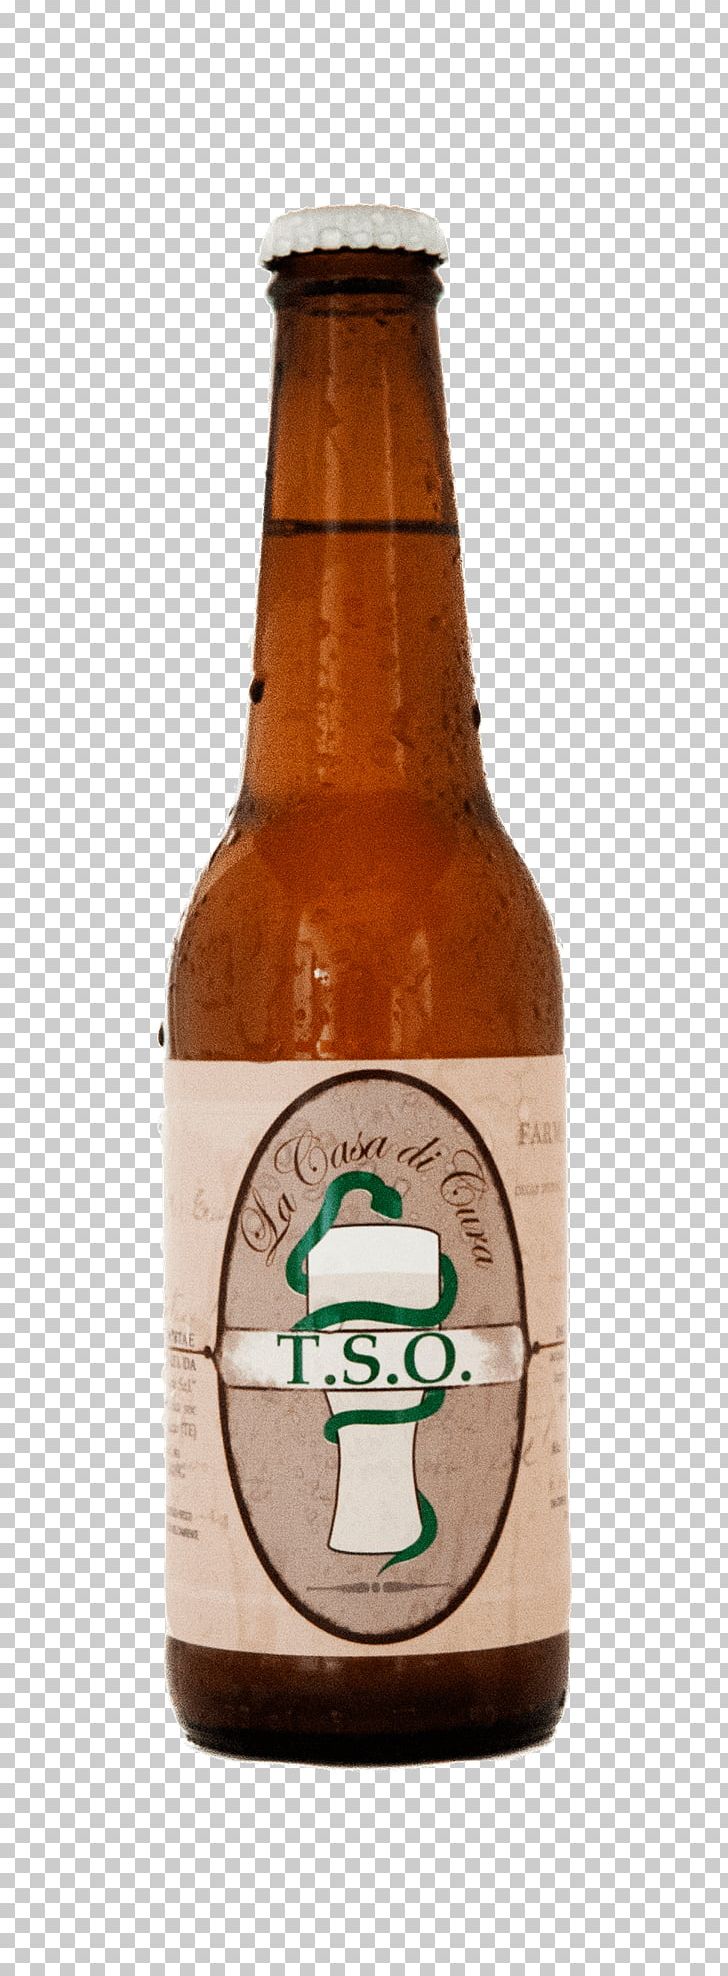 Beer Bottle Tripel India Pale Ale PNG, Clipart, Alcohol By Volume, Beer, Beer Bottle, Bottle, Brewery Free PNG Download